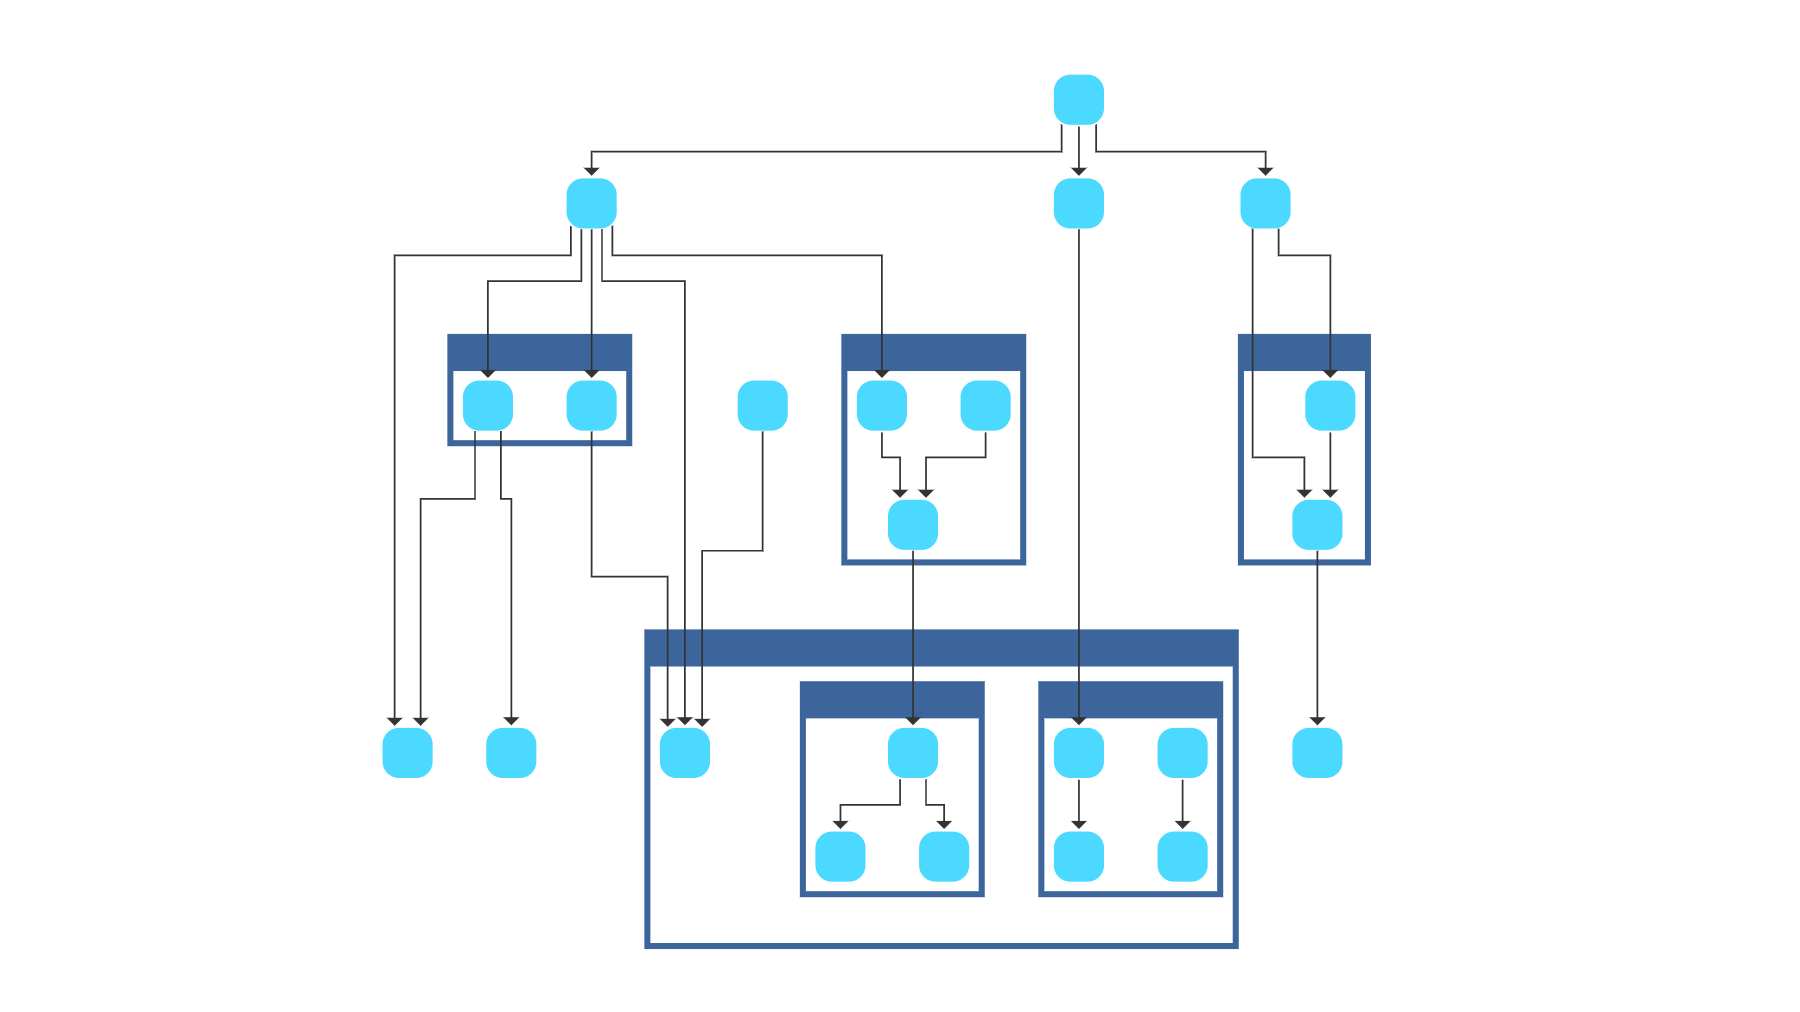 Hierarchic Style with Group Nodes